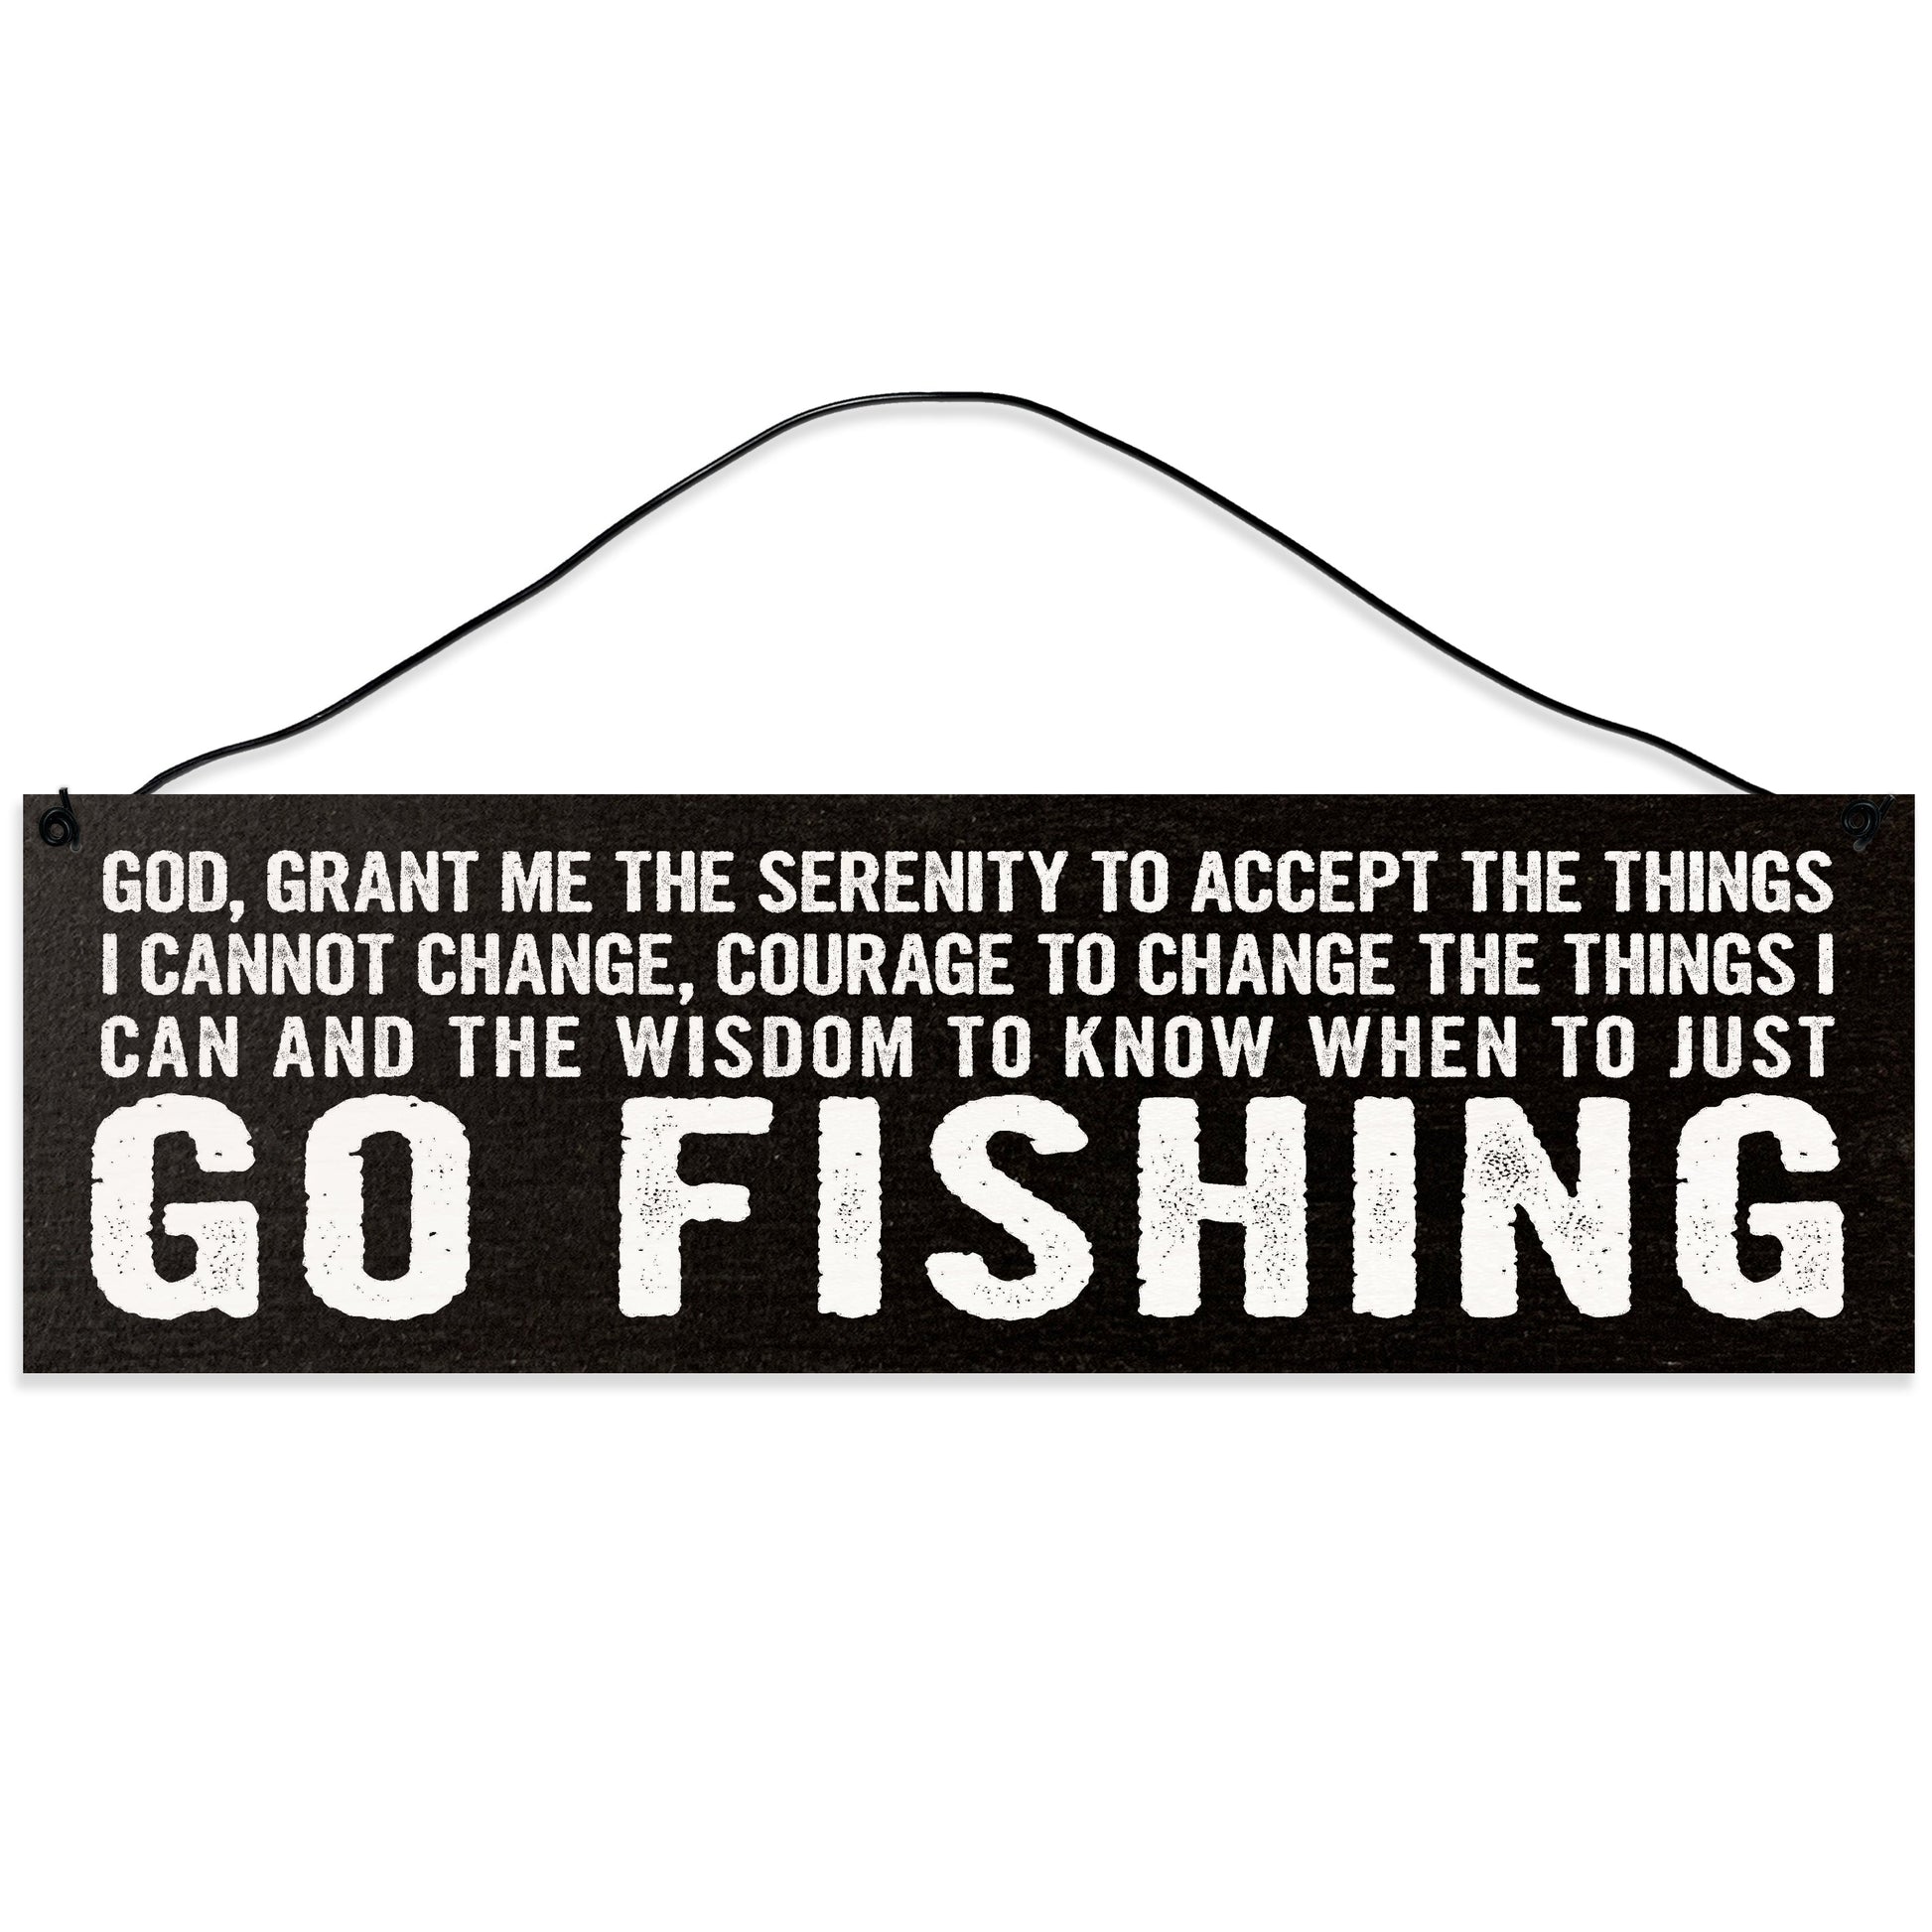 Sawyer's Mill - Fishing Serenity Prayer. Wood Sign for Home or Office. Measures 3x10 inches.